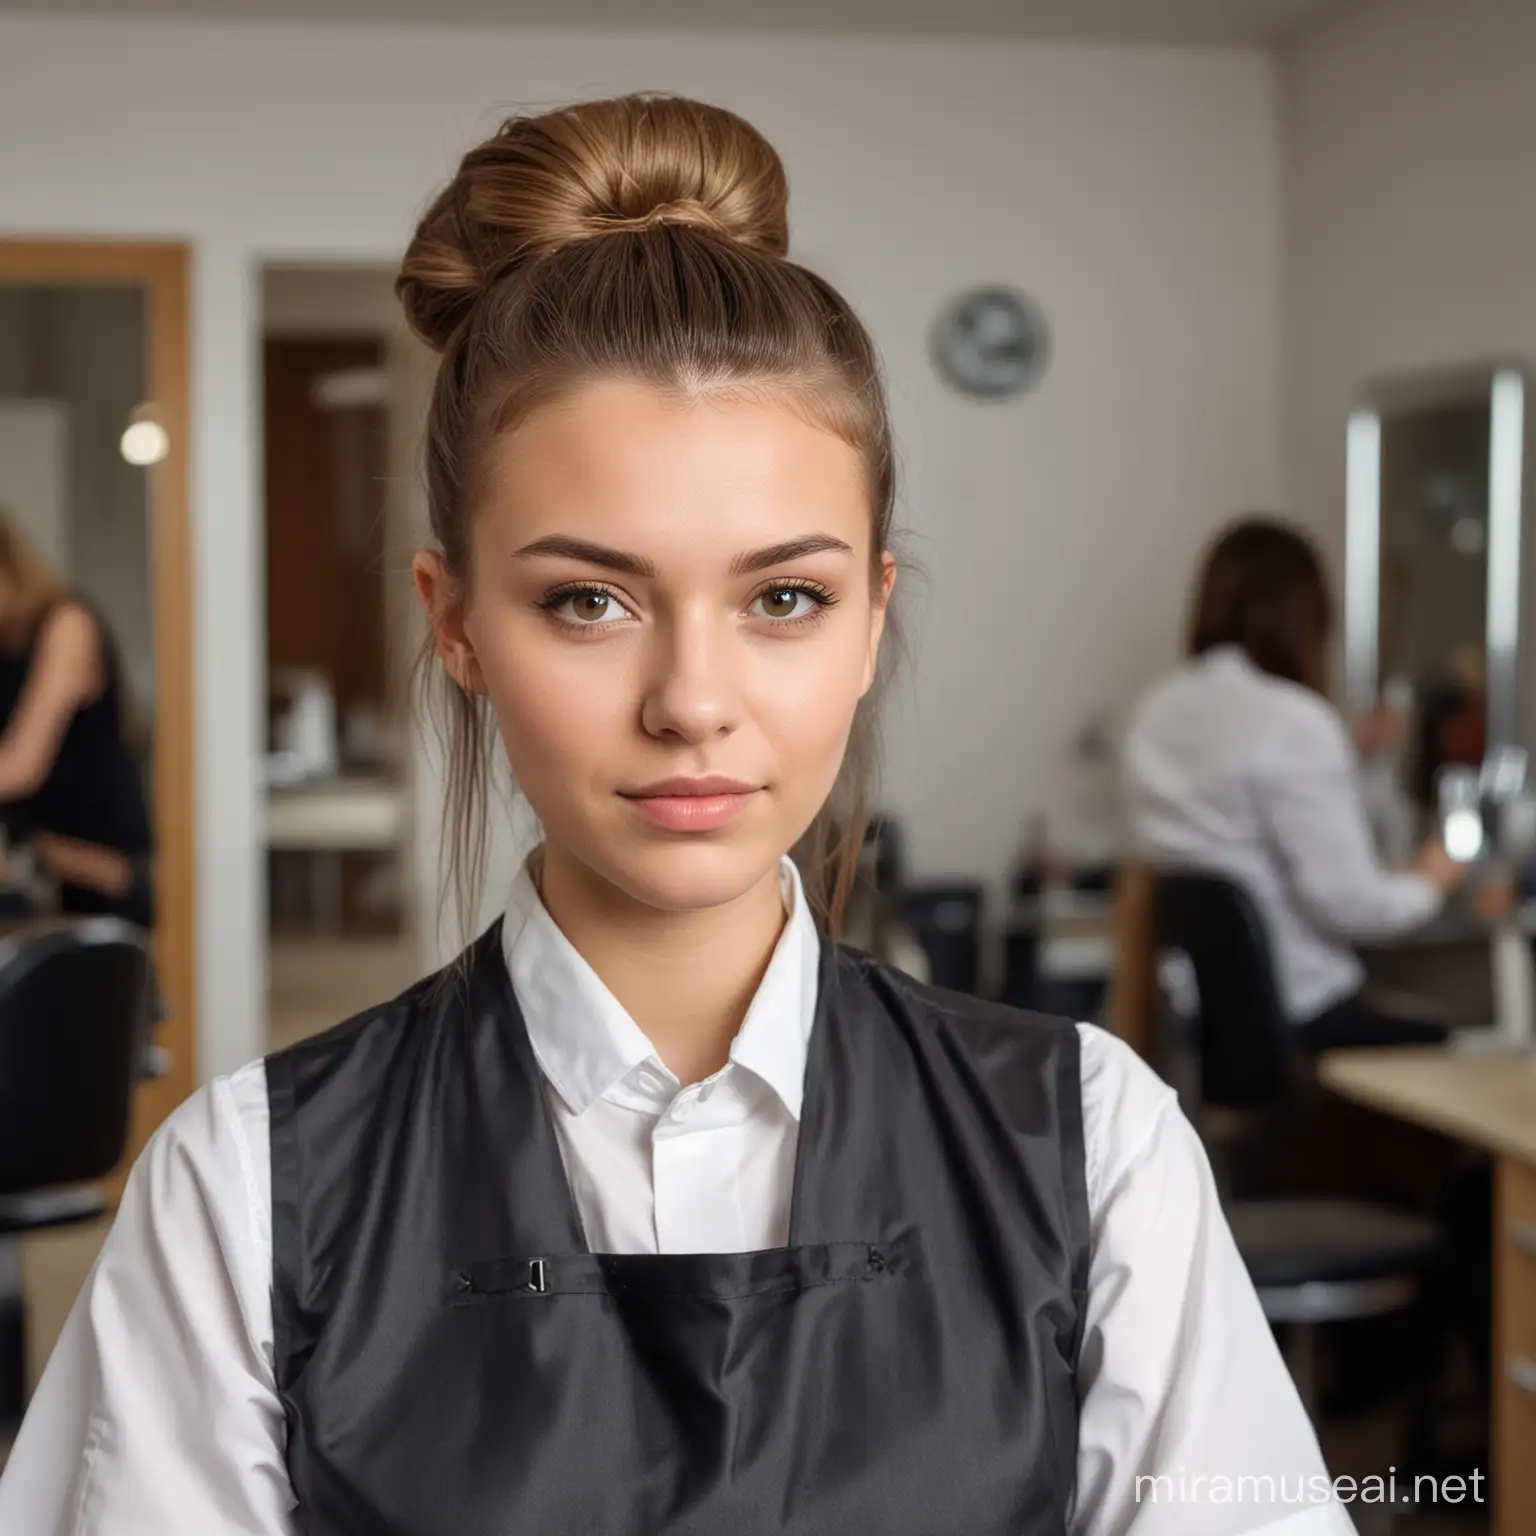 Portrait of a Young Polish Hairdresser Business Photography in a Hairdressing Establishment